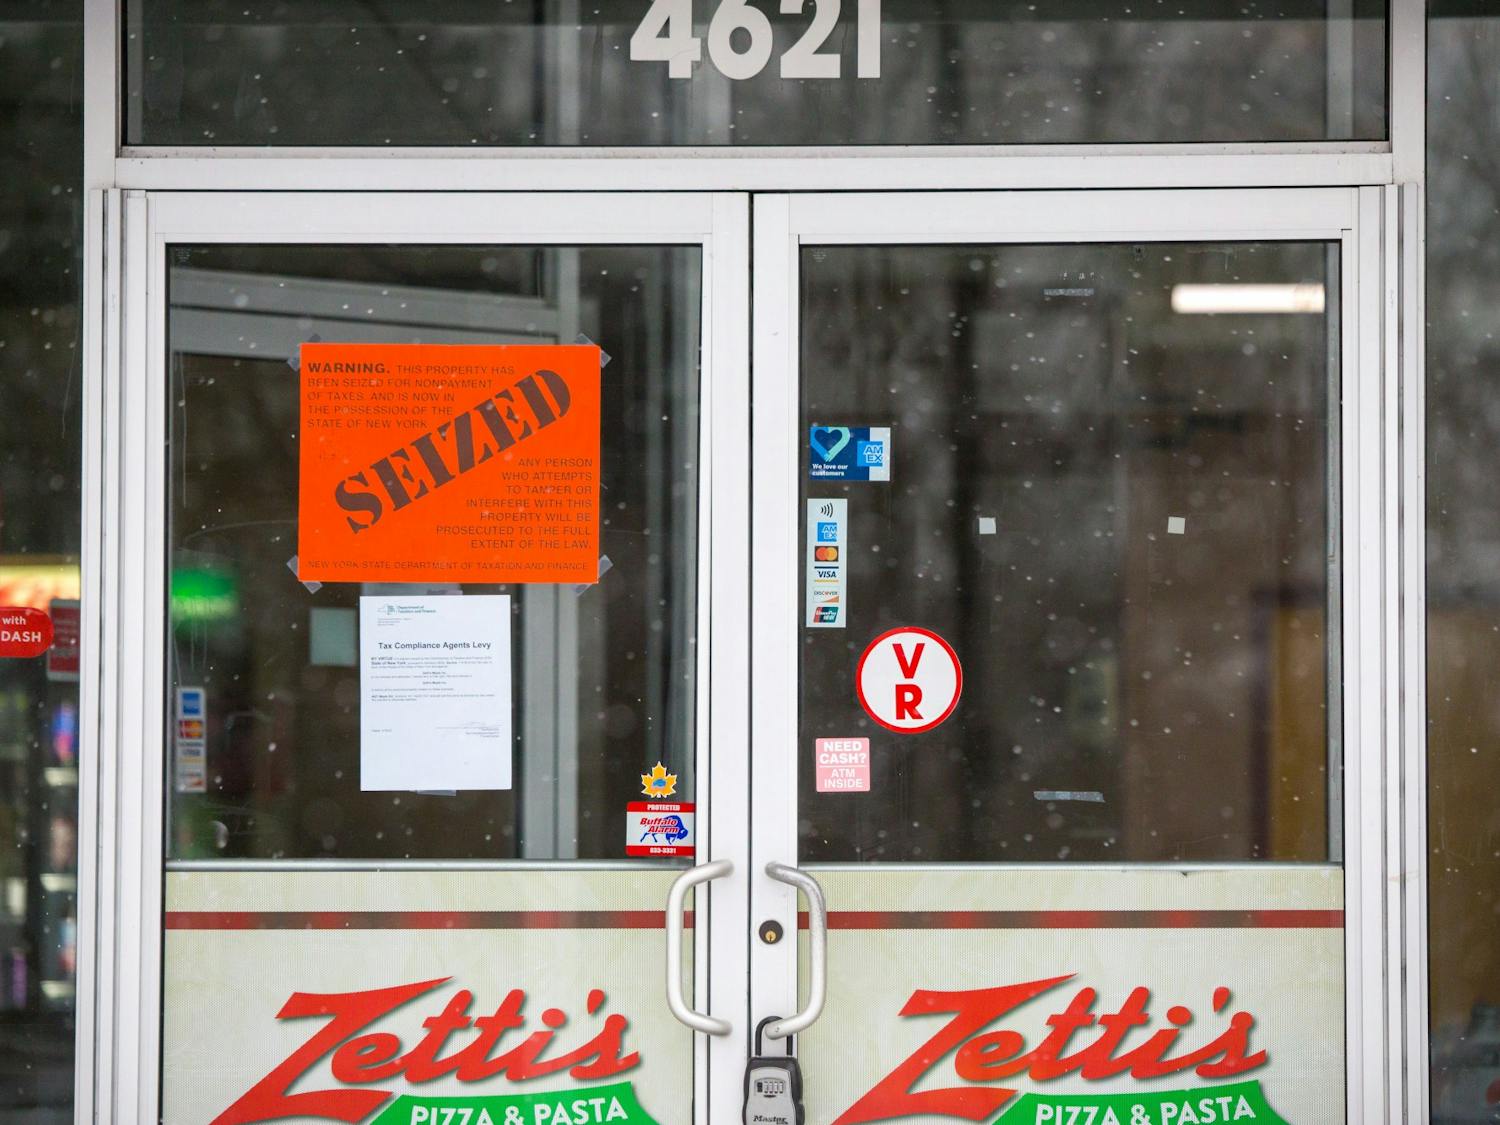 Zettis, a popular pizzeria near North Campus, was shut down following non-payment of over $100,000 in taxes.